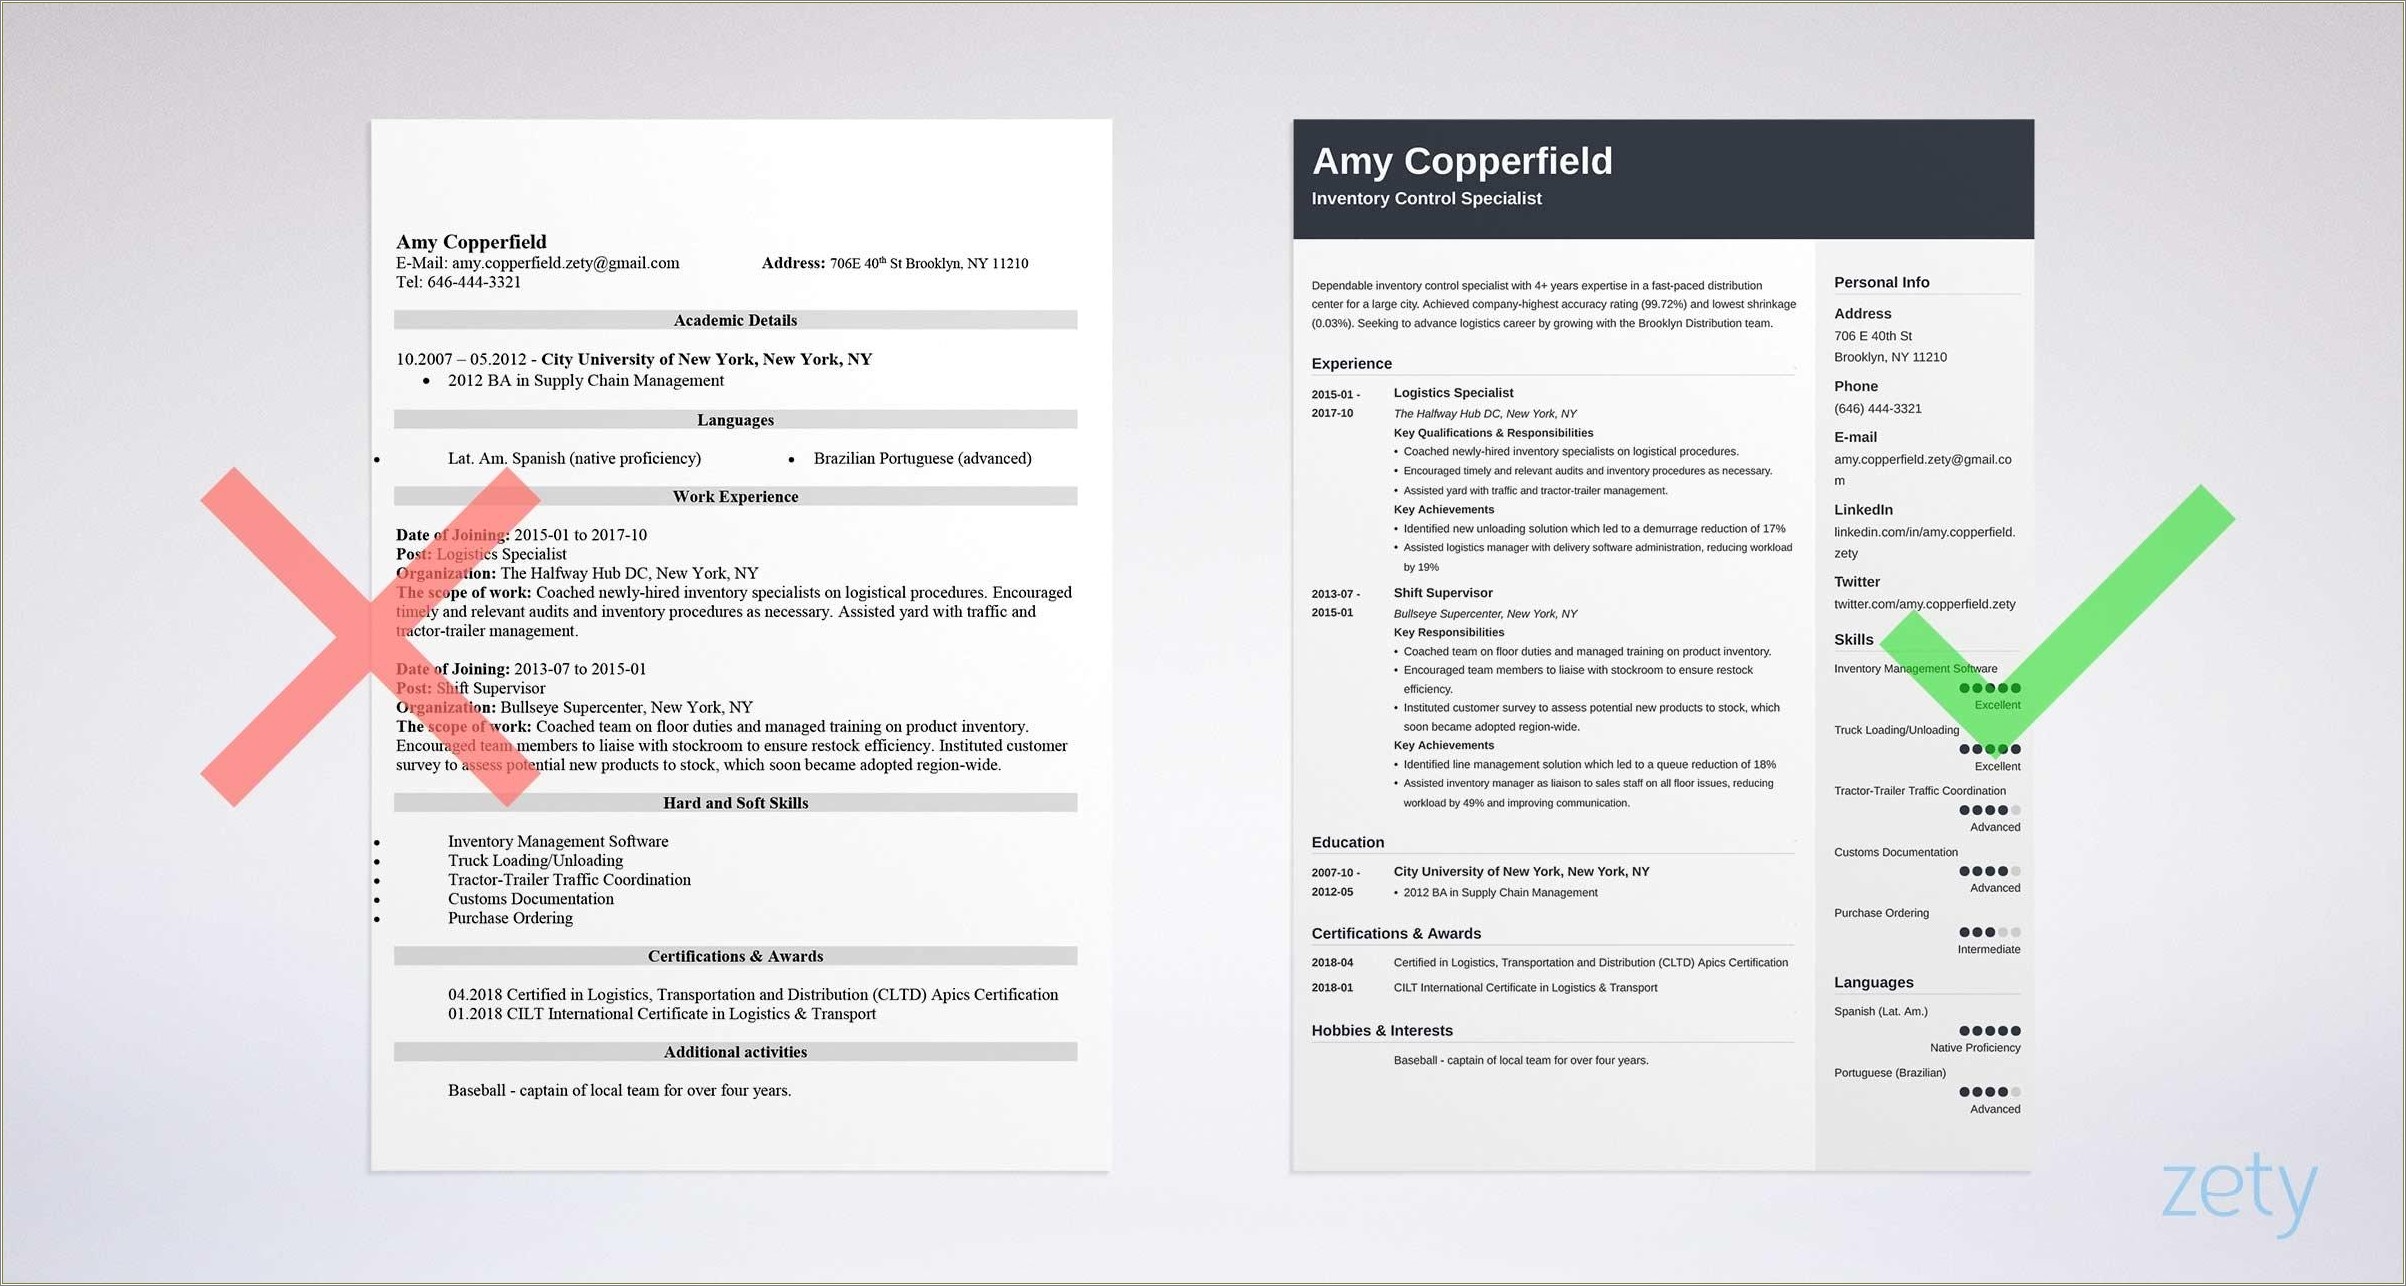 Free Supply Chain Resume Samples Online